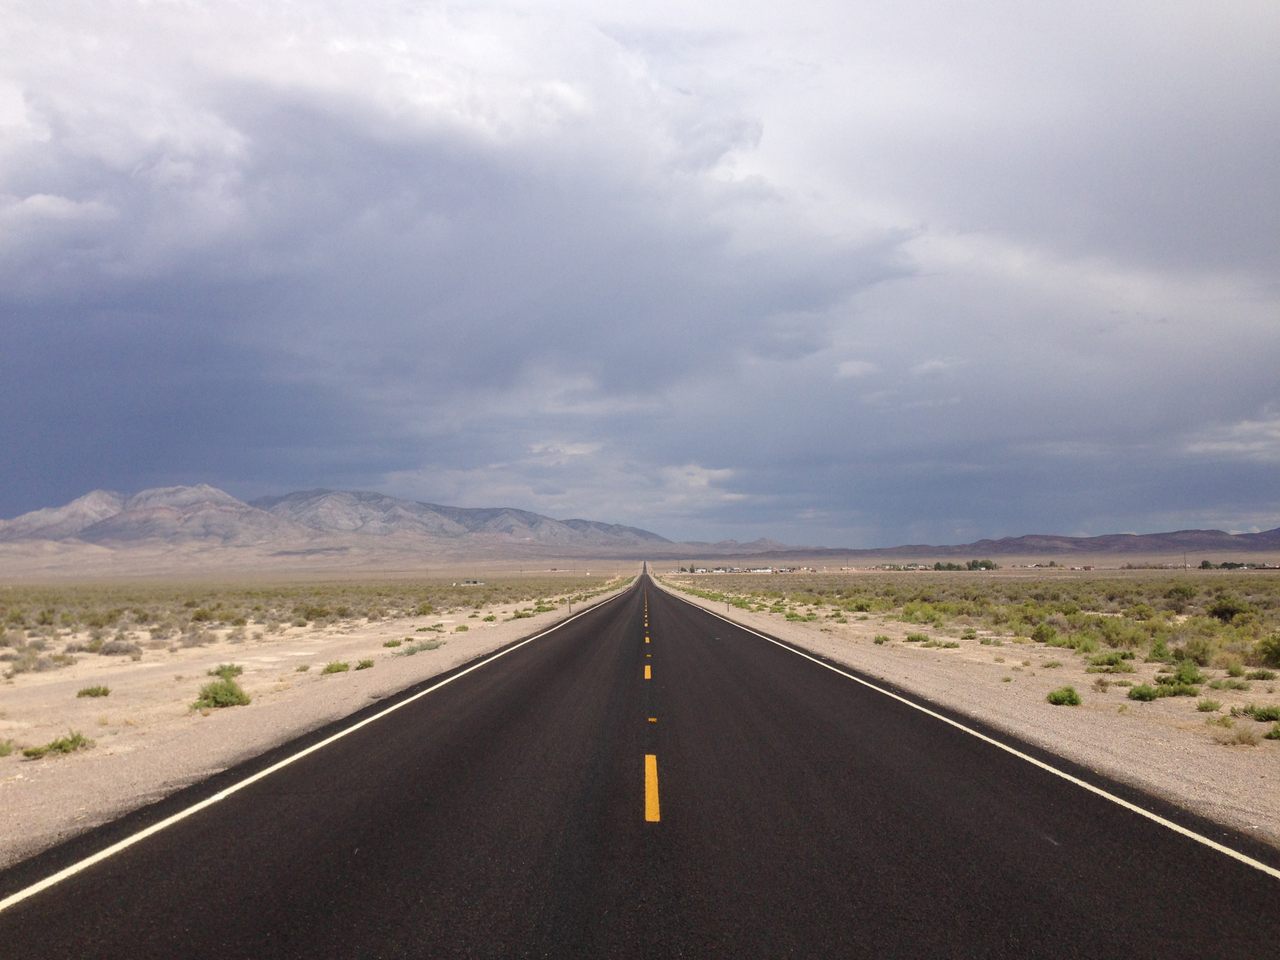 Nevada State Route 375 was officially designated as the Extraterrestial Highway in a nod to rumors of otherworldly activity, but the desert road offers plenty of more grounded attractions.